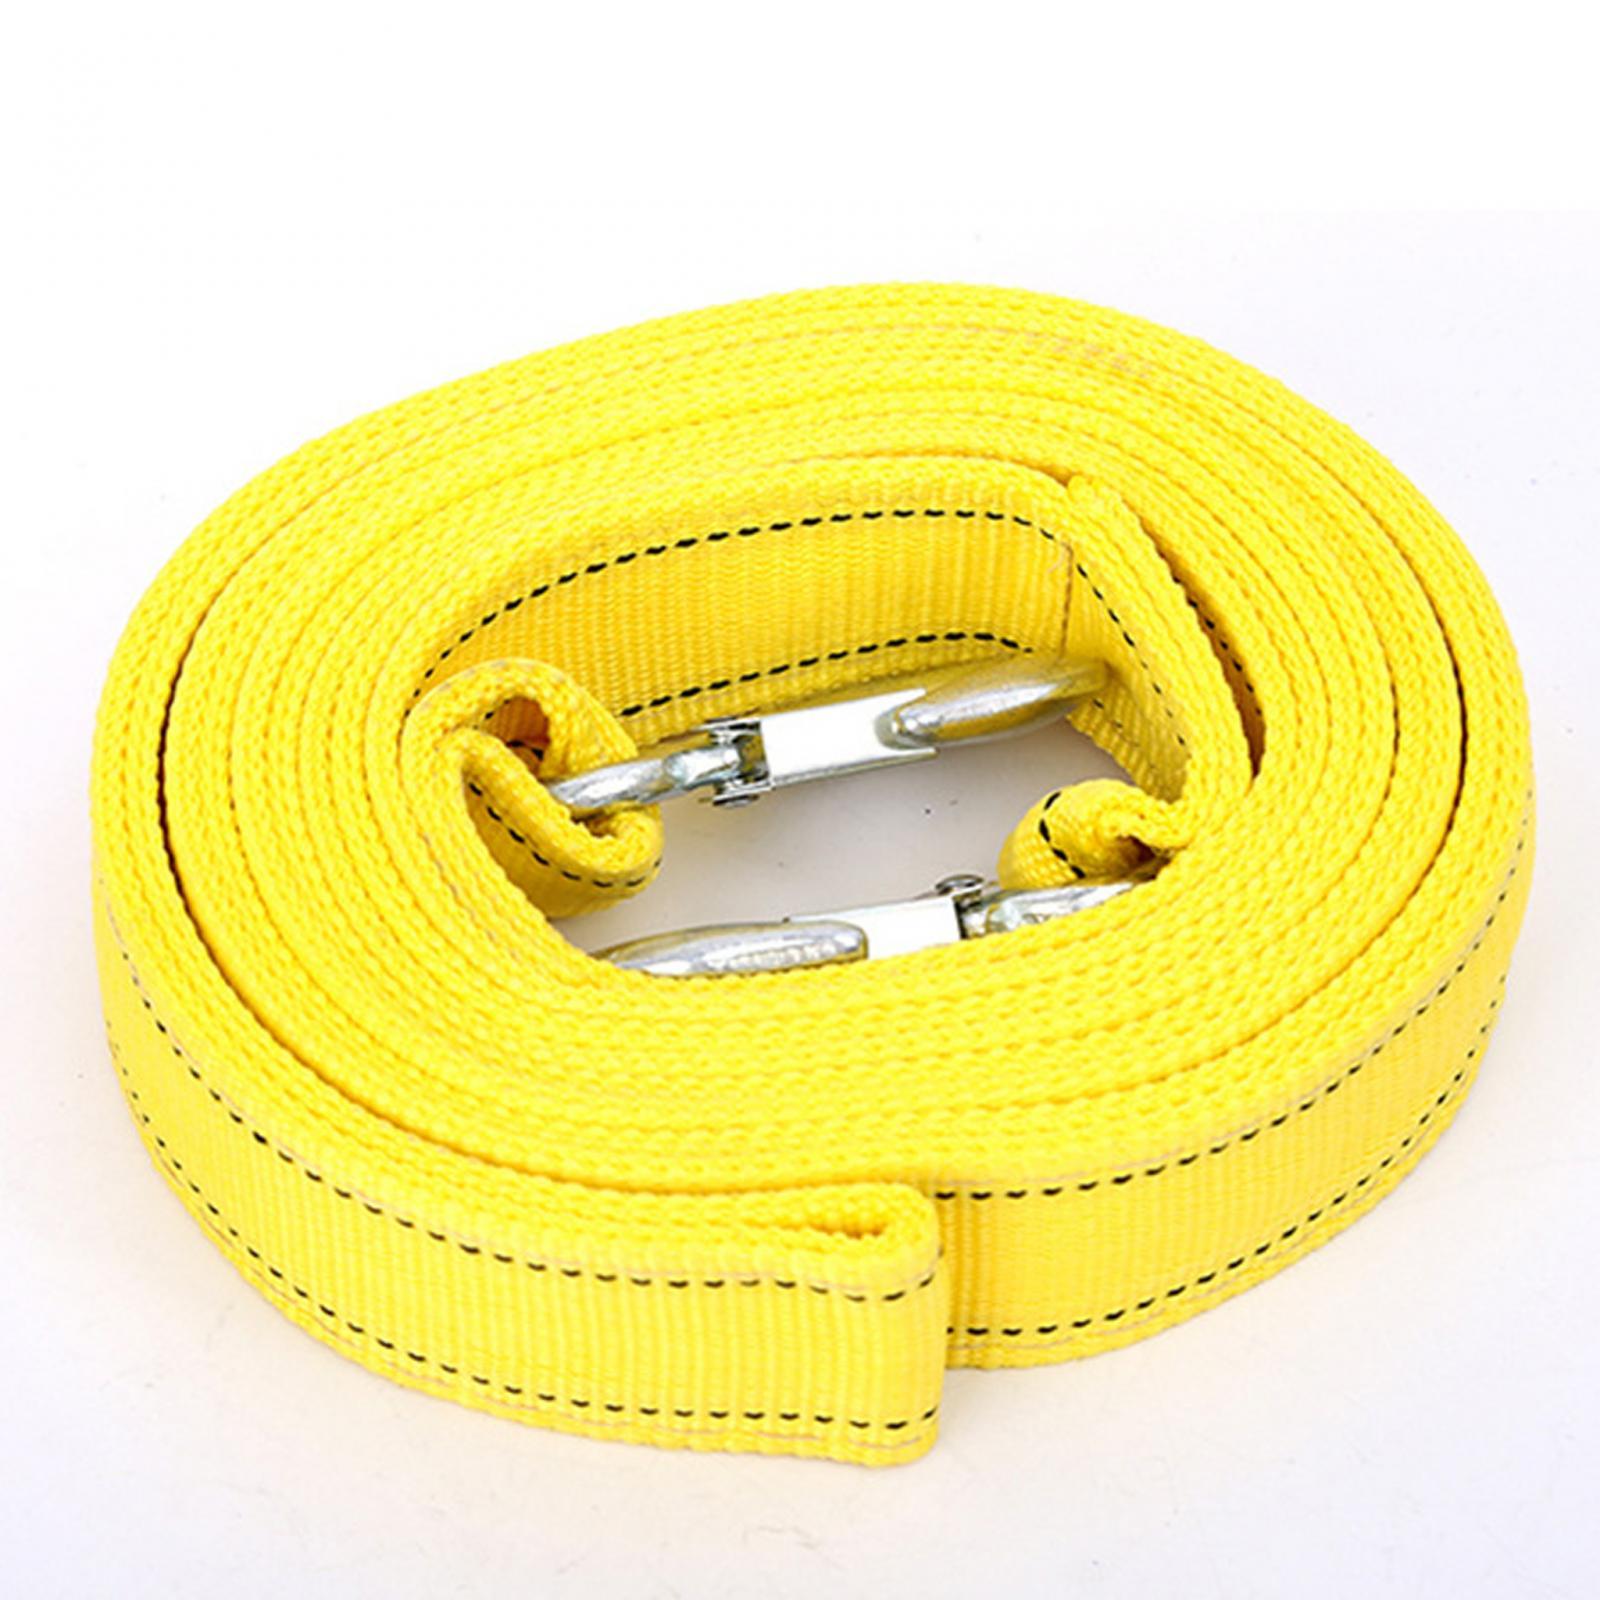 Tow Rope for Vehicles 5T Capacity Well Made Accessories Truck Recovery Strap 4m